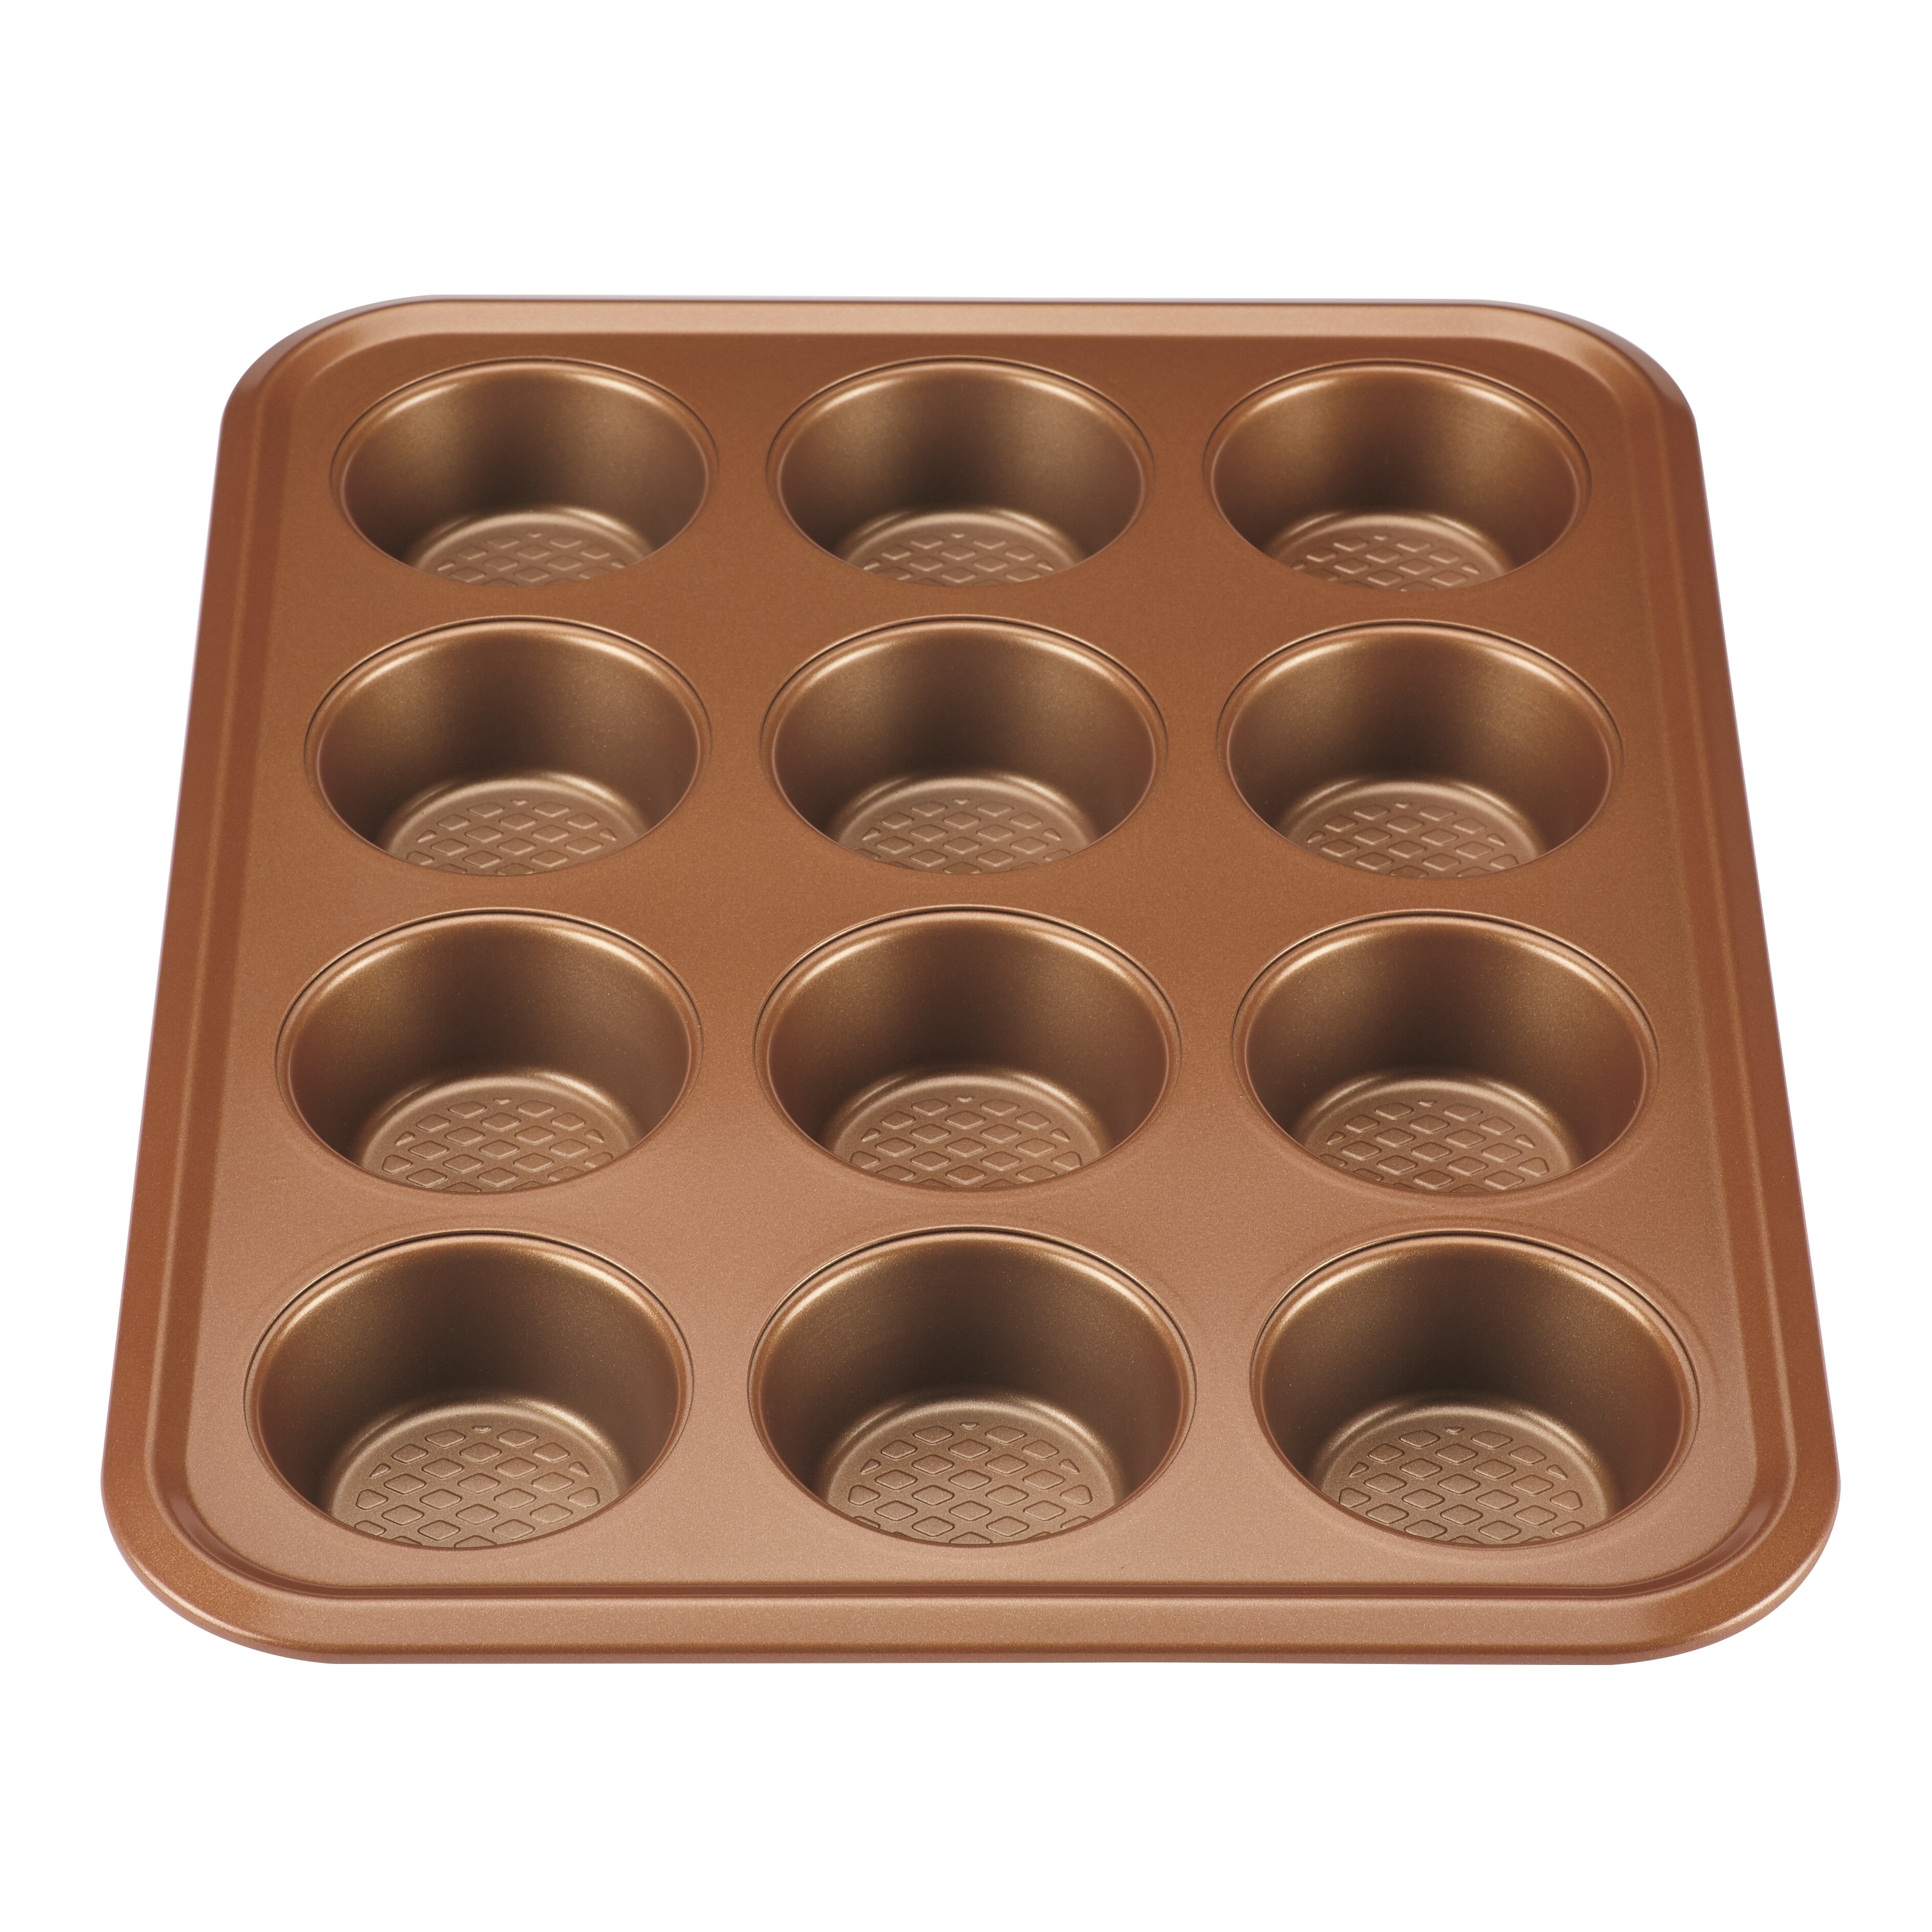 Nonstick Copper Muffin Pan 12 Cup Even Baking Dishwasher and Oven Safe 